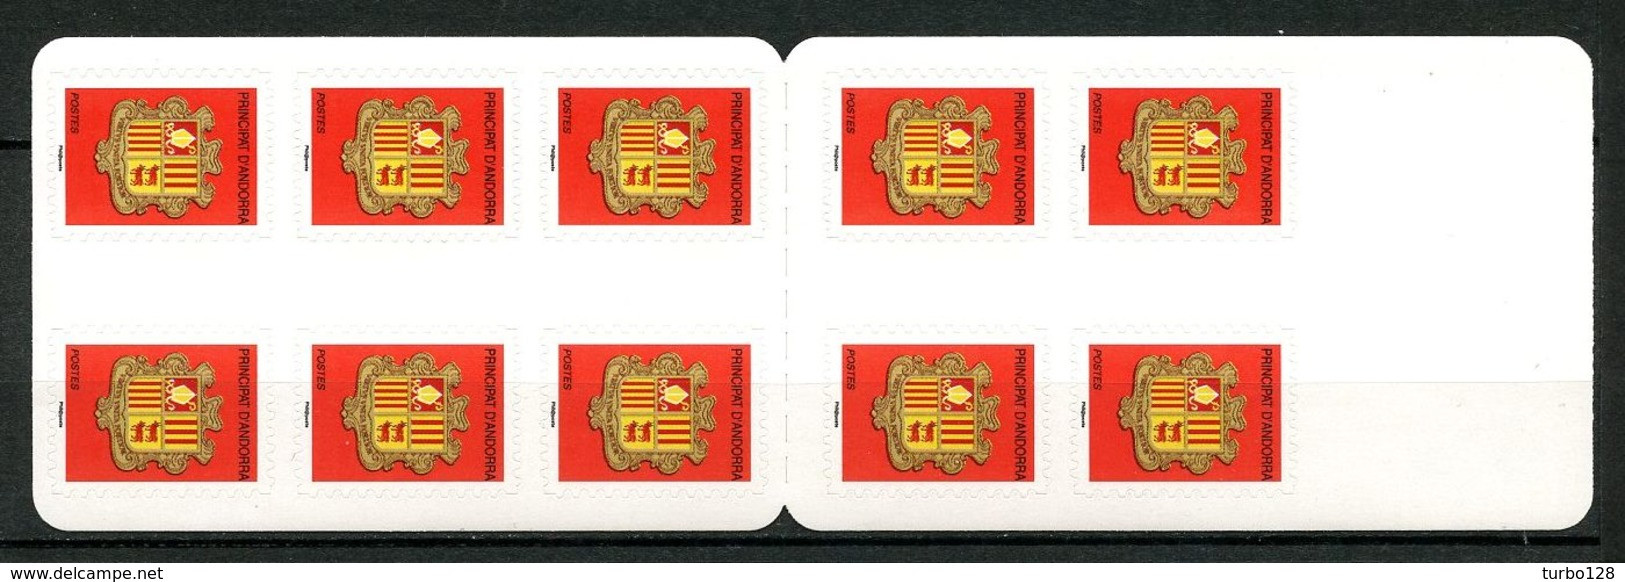 ANDORRE 2007 Carnet N° 13 ( 638 X 10 ) ** Neuf MNH Superbe C 20 € Armoiries Faune Vaches Animaux Coats Of Arms - Markenheftchen